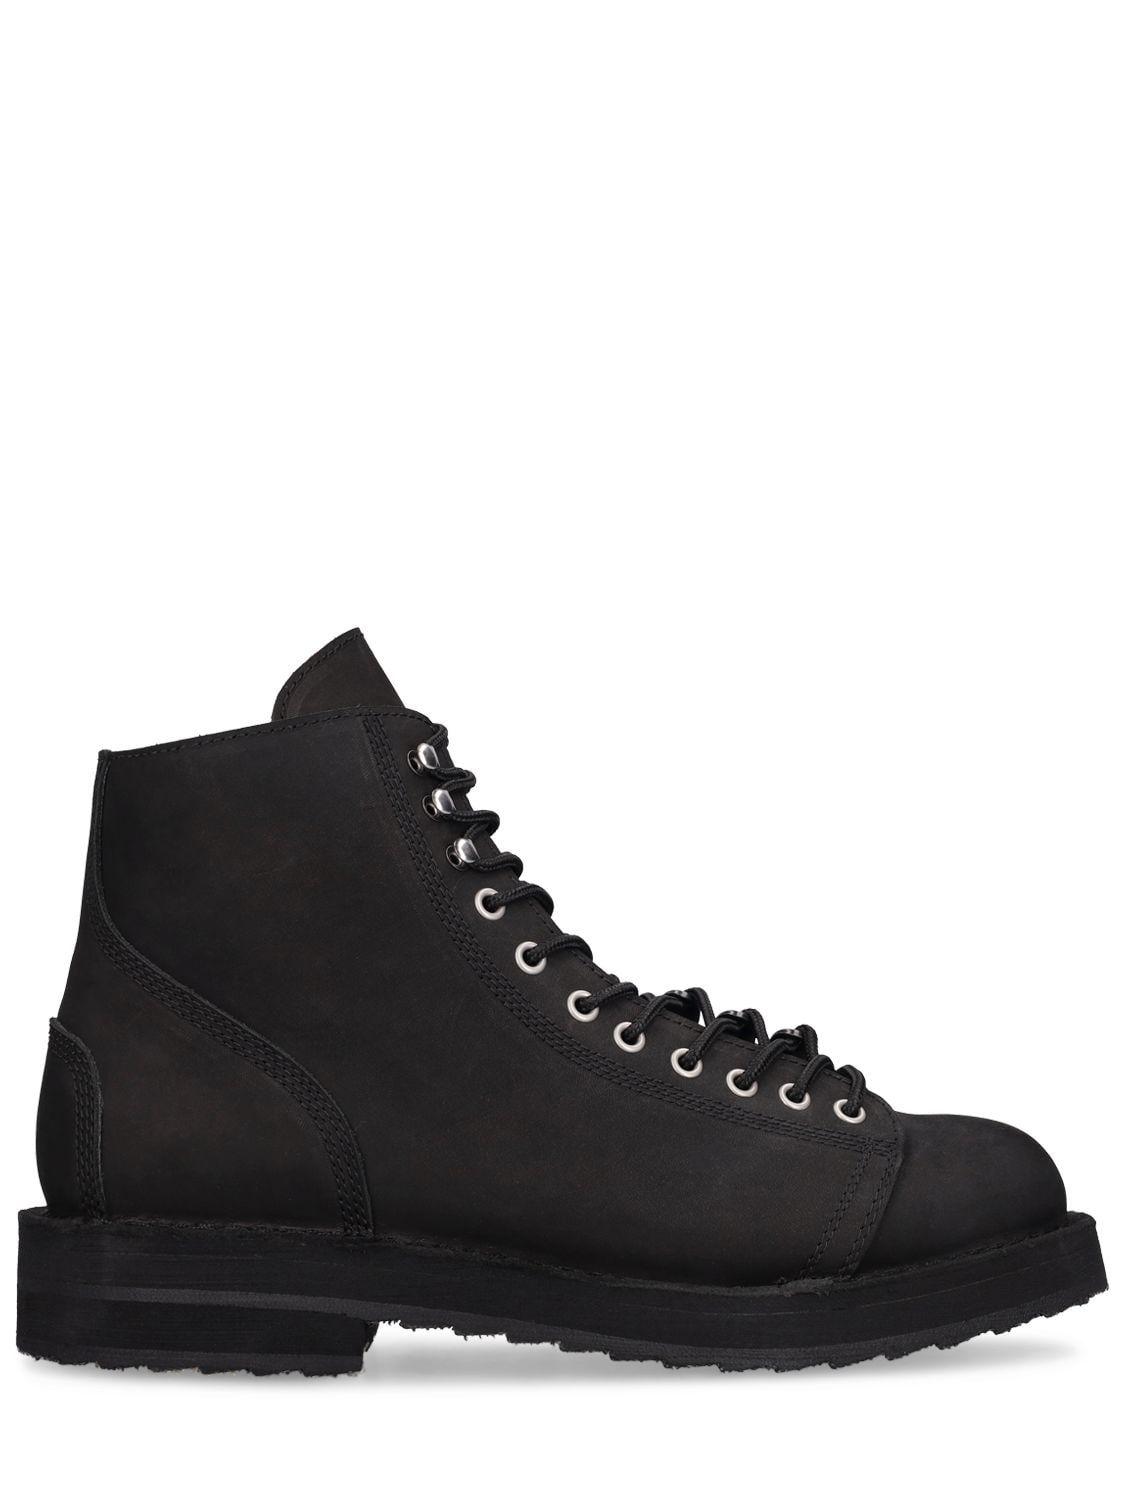 Yohji Yamamoto Leather Lace-up Boots in Black for Men | Lyst